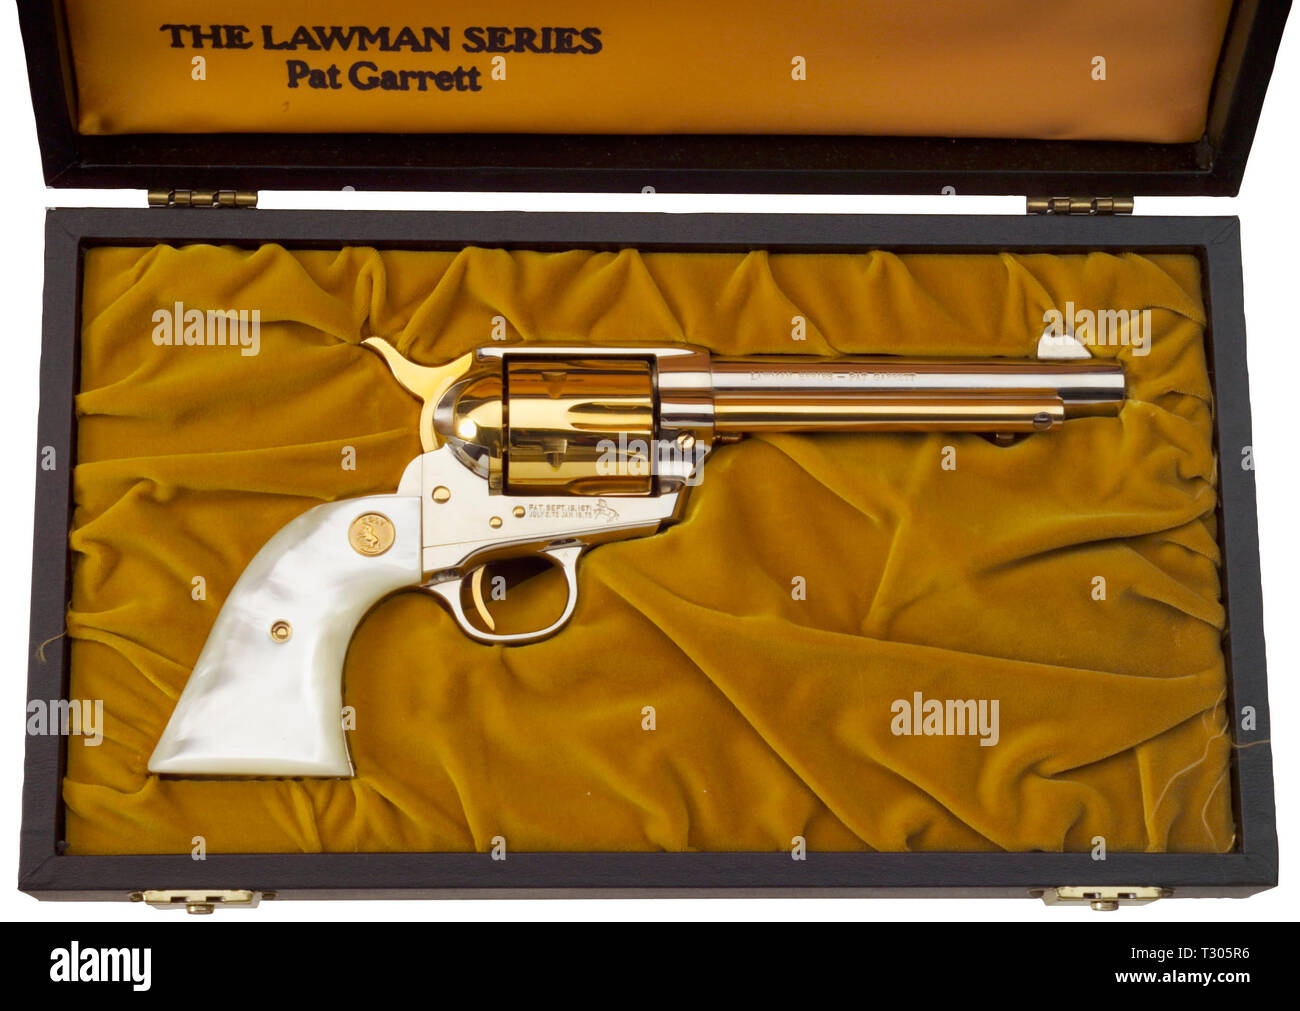 Small arms, revolver, Colt Commemorative, Lawman Series, Pat Garrett, 1968, caliber .45, Additional-Rights-Clearance-Info-Not-Available Stock Photo